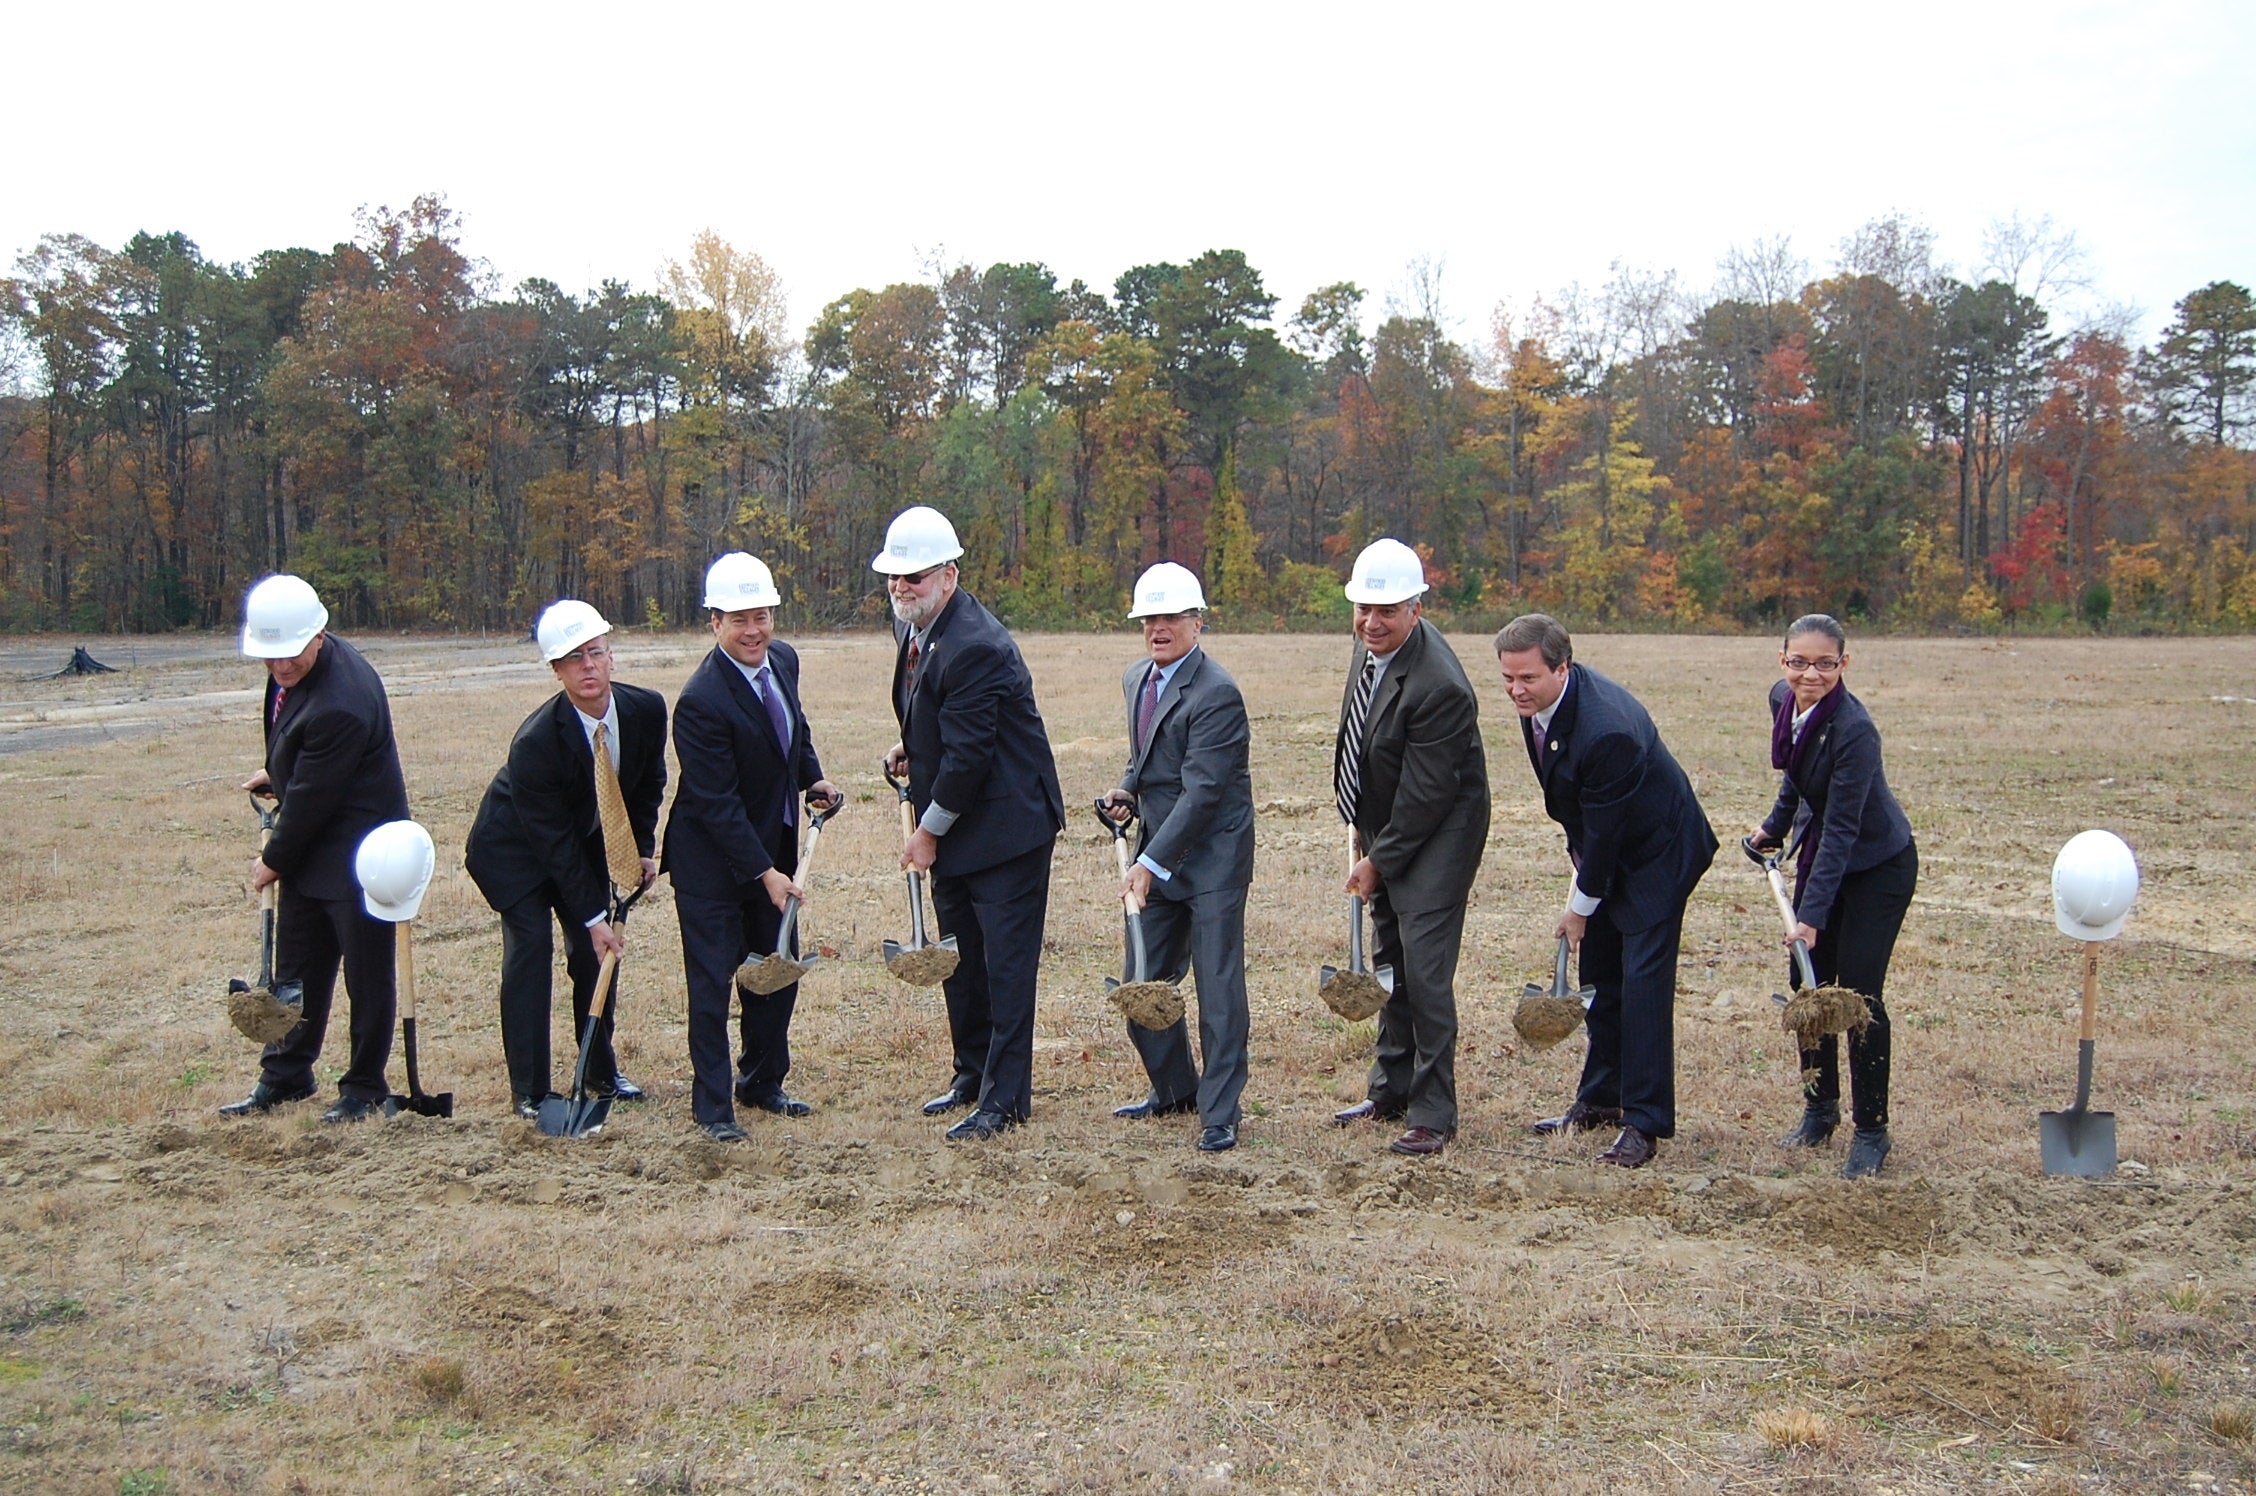  A ceremonial groundbreaking marks the start of a new housing development in Camden County, New Jersey. (Tom MacDonald/WHYY) 